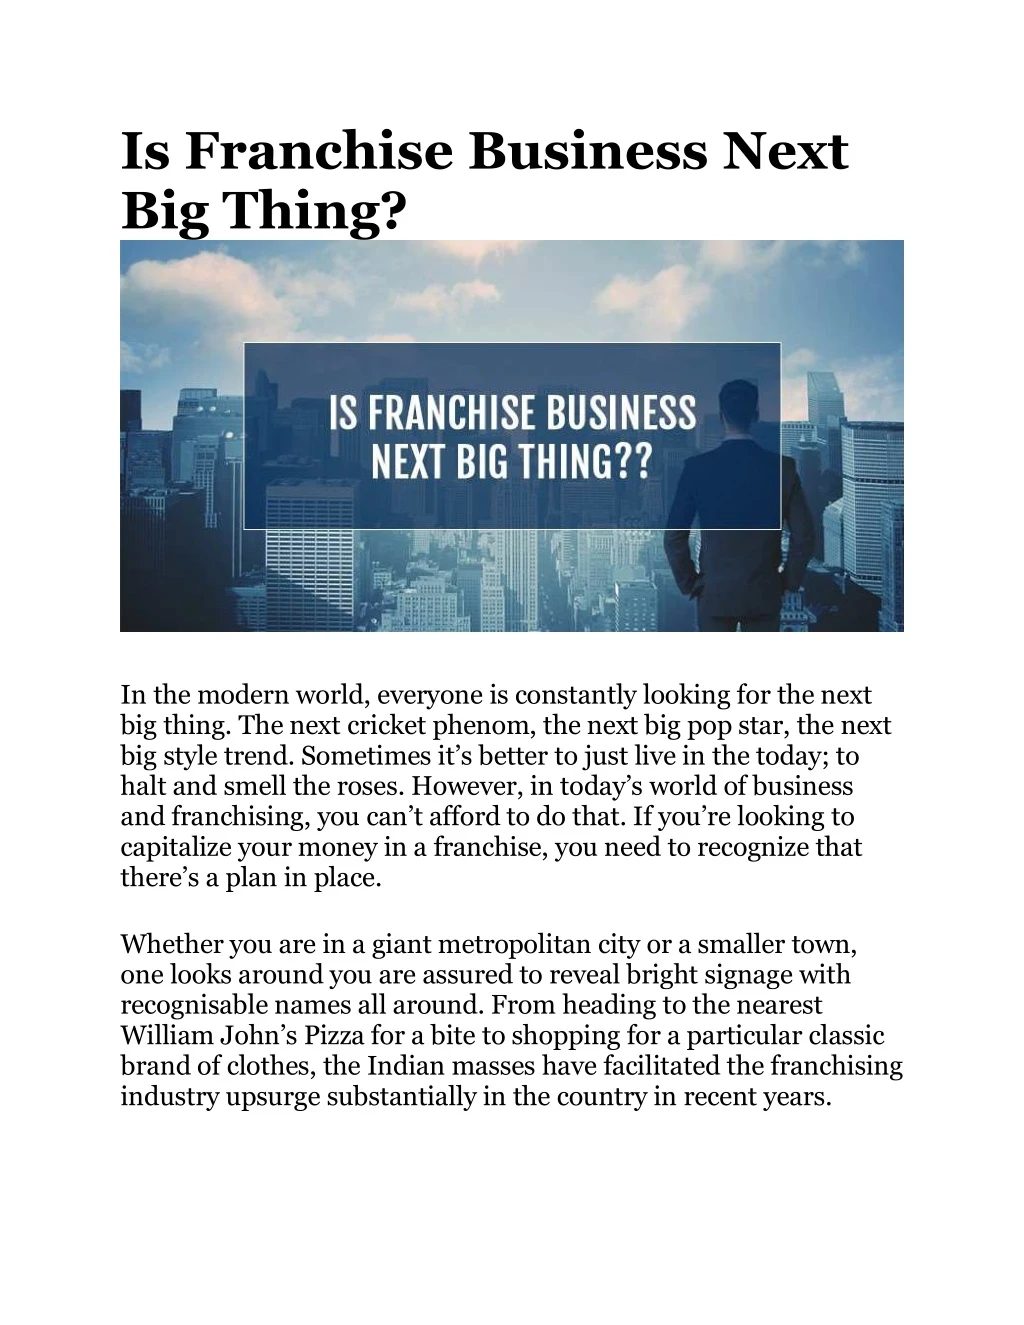 is franchise business next big thing